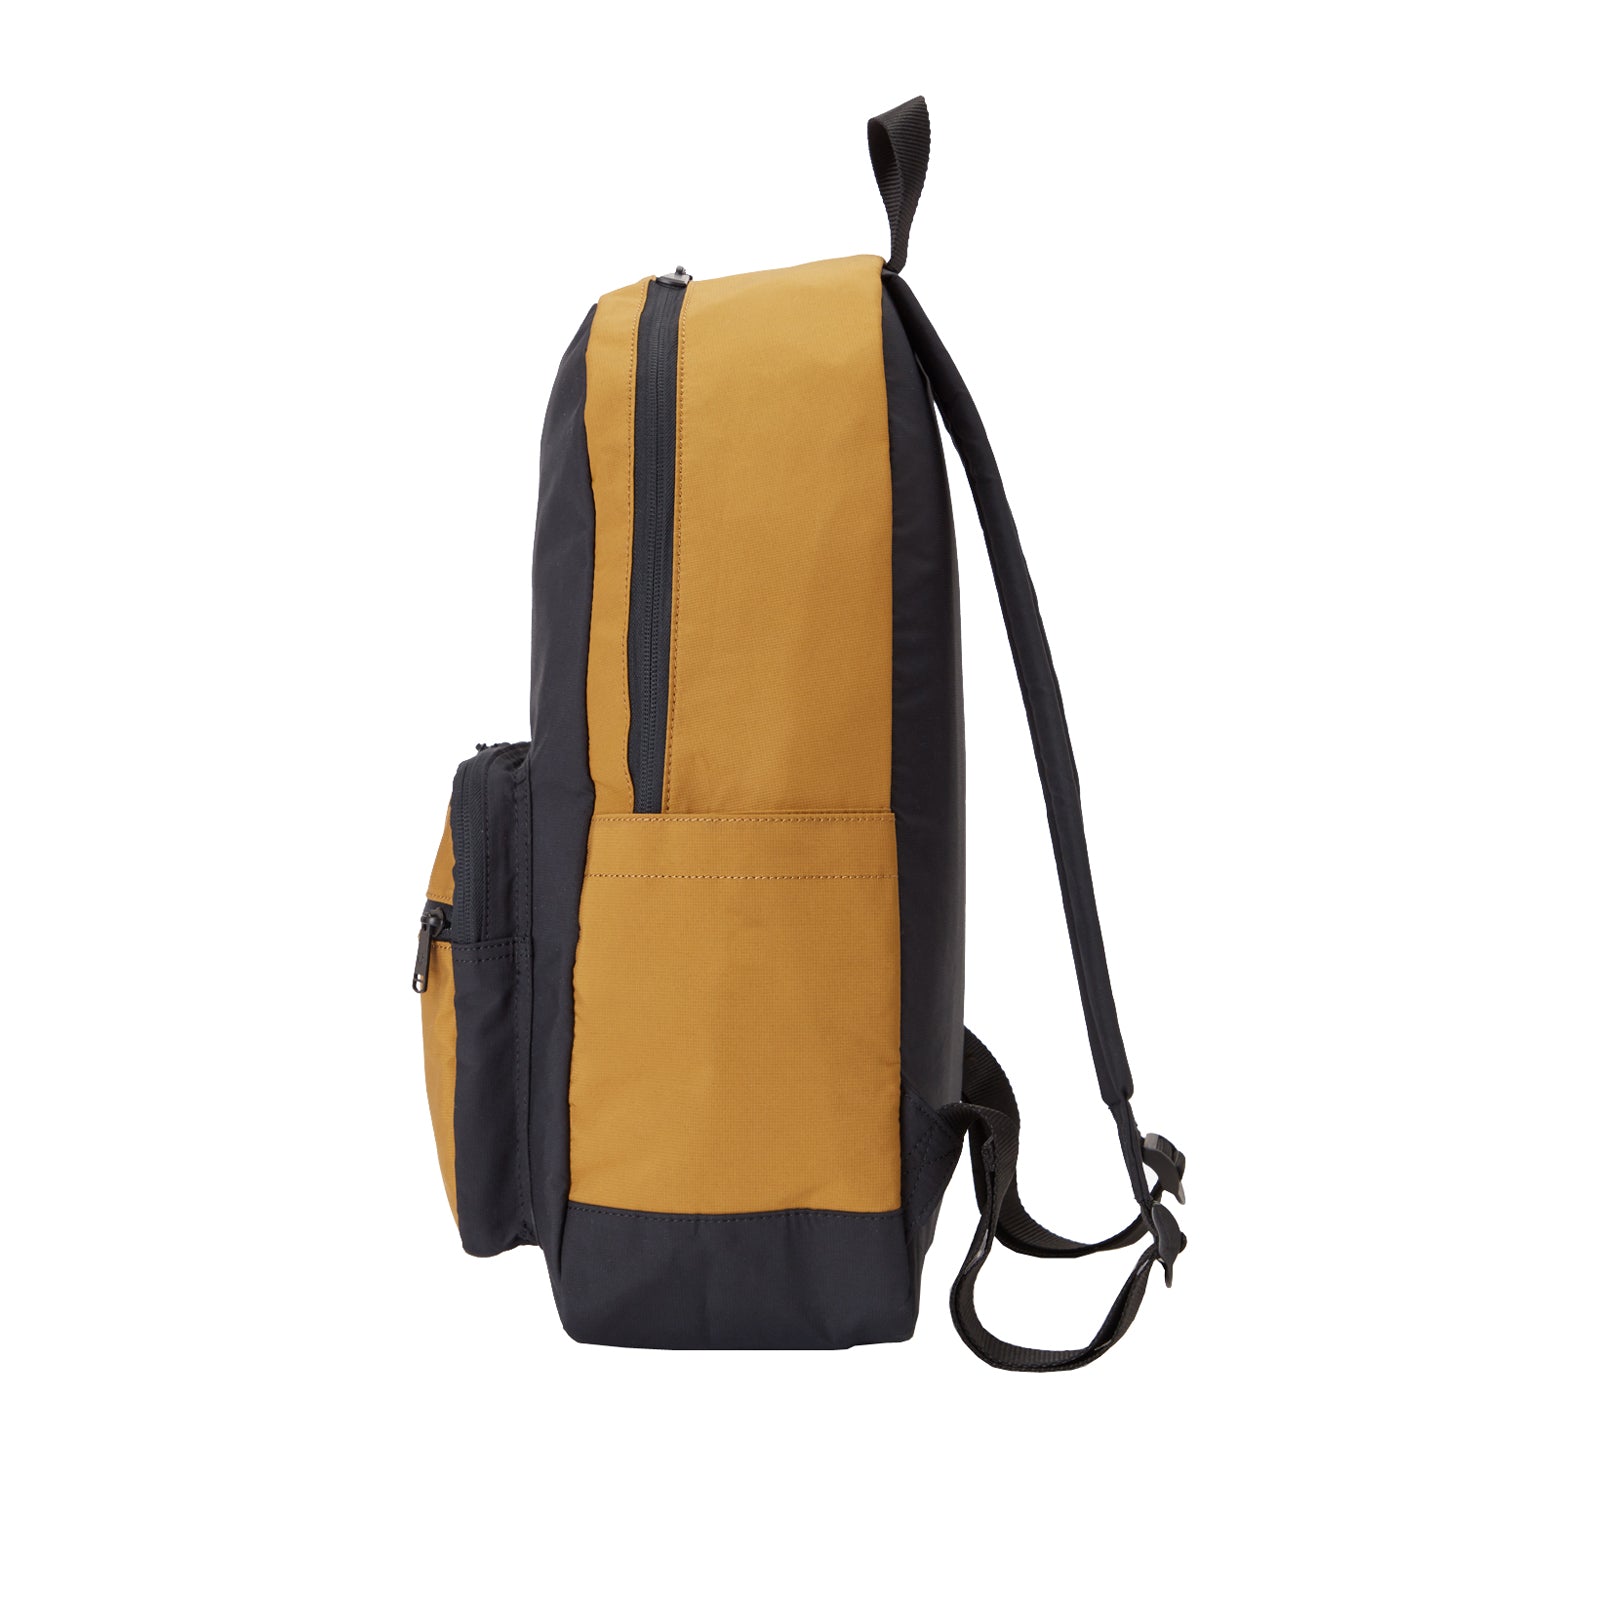 Fred Perry Contrast Ripstop Backpack Black/Dark Caramel. Foto da lateral.